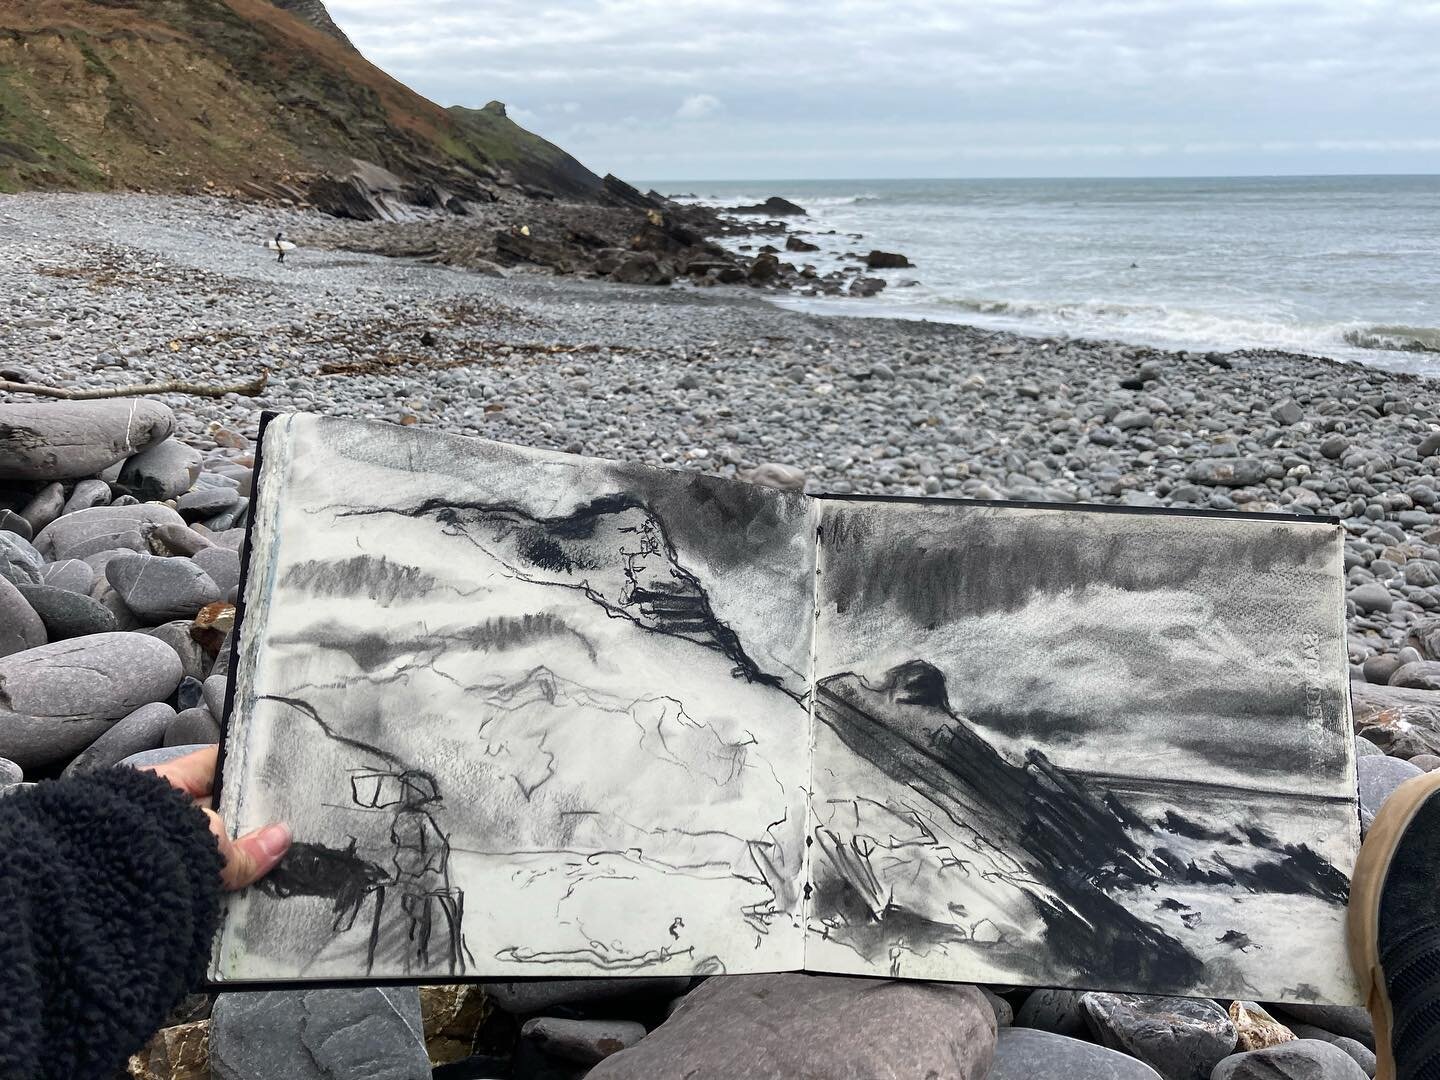 More sketching in Cornwall. Thanks @_sarareedartist for sharing your favourite places with me! 

.
.
.
.
.
#sketchbook #artofinstagram #charcoaldrawing #pleinair #landscapes #cloudscape #markmaking #cornwall